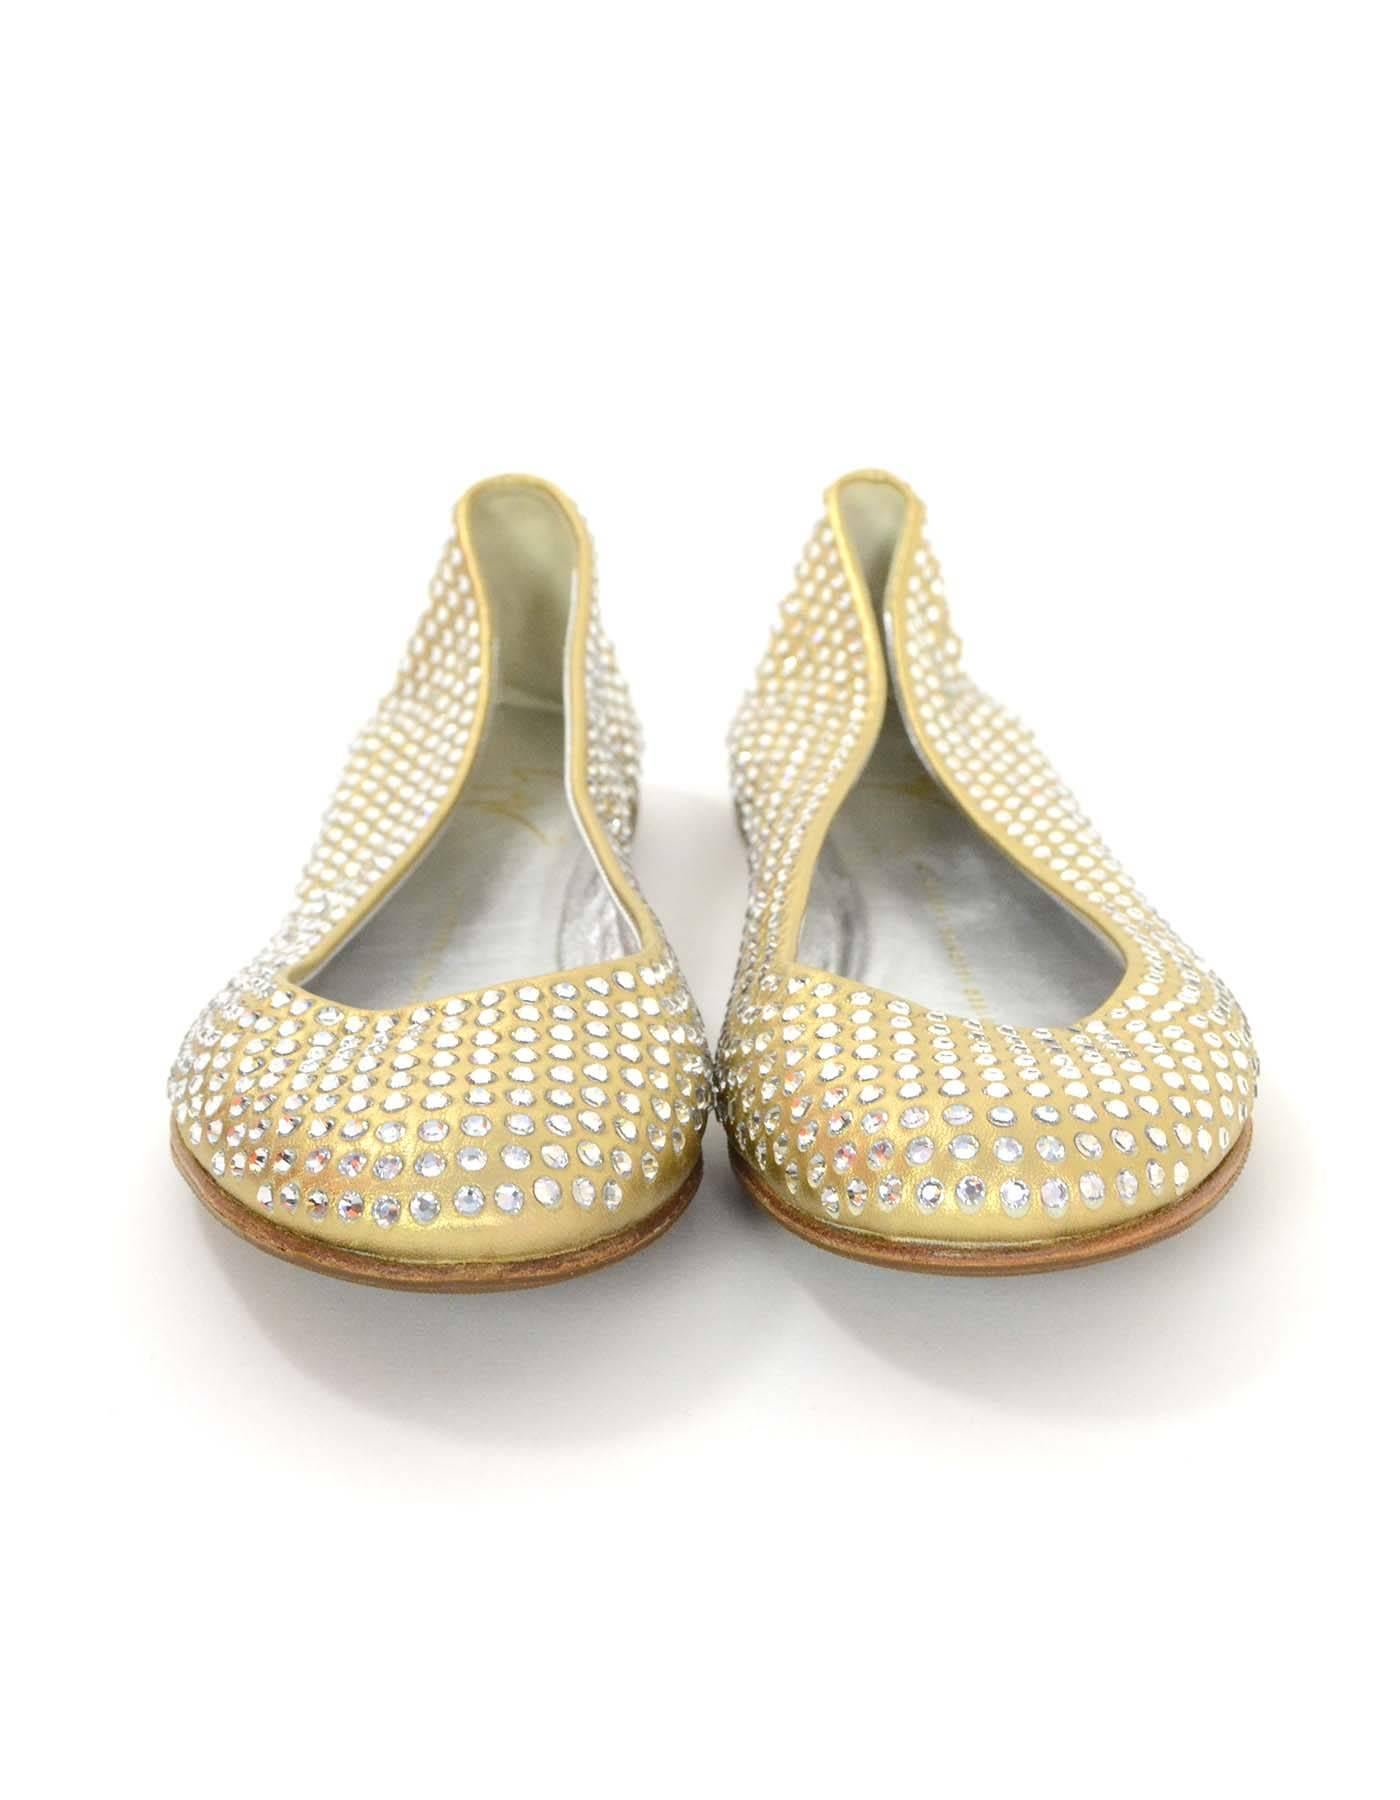 Giuseppe Zanotti Metallic Gold Leather & Crystal Embellished Flats sz 7 In Excellent Condition In New York, NY